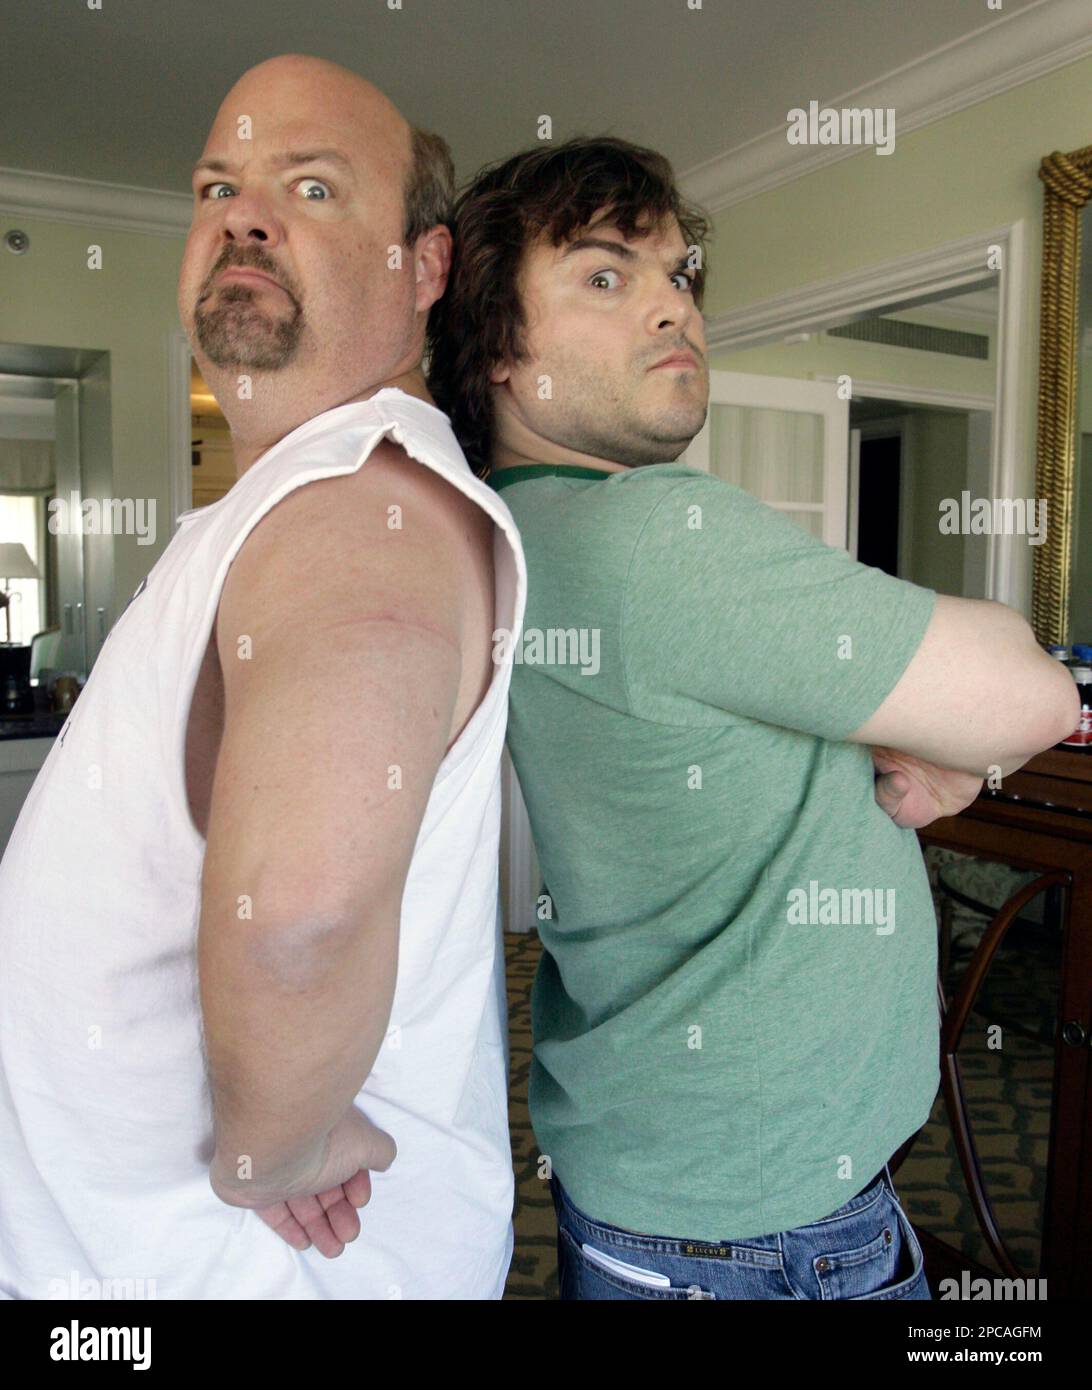 Los Angeles, California, USA. 18th Sep, 2018. Actor Jack Black, right,  poses with Kyle Gass during his star ceremony on the Hollywood Walk of Fame  Star where he was the recipient of